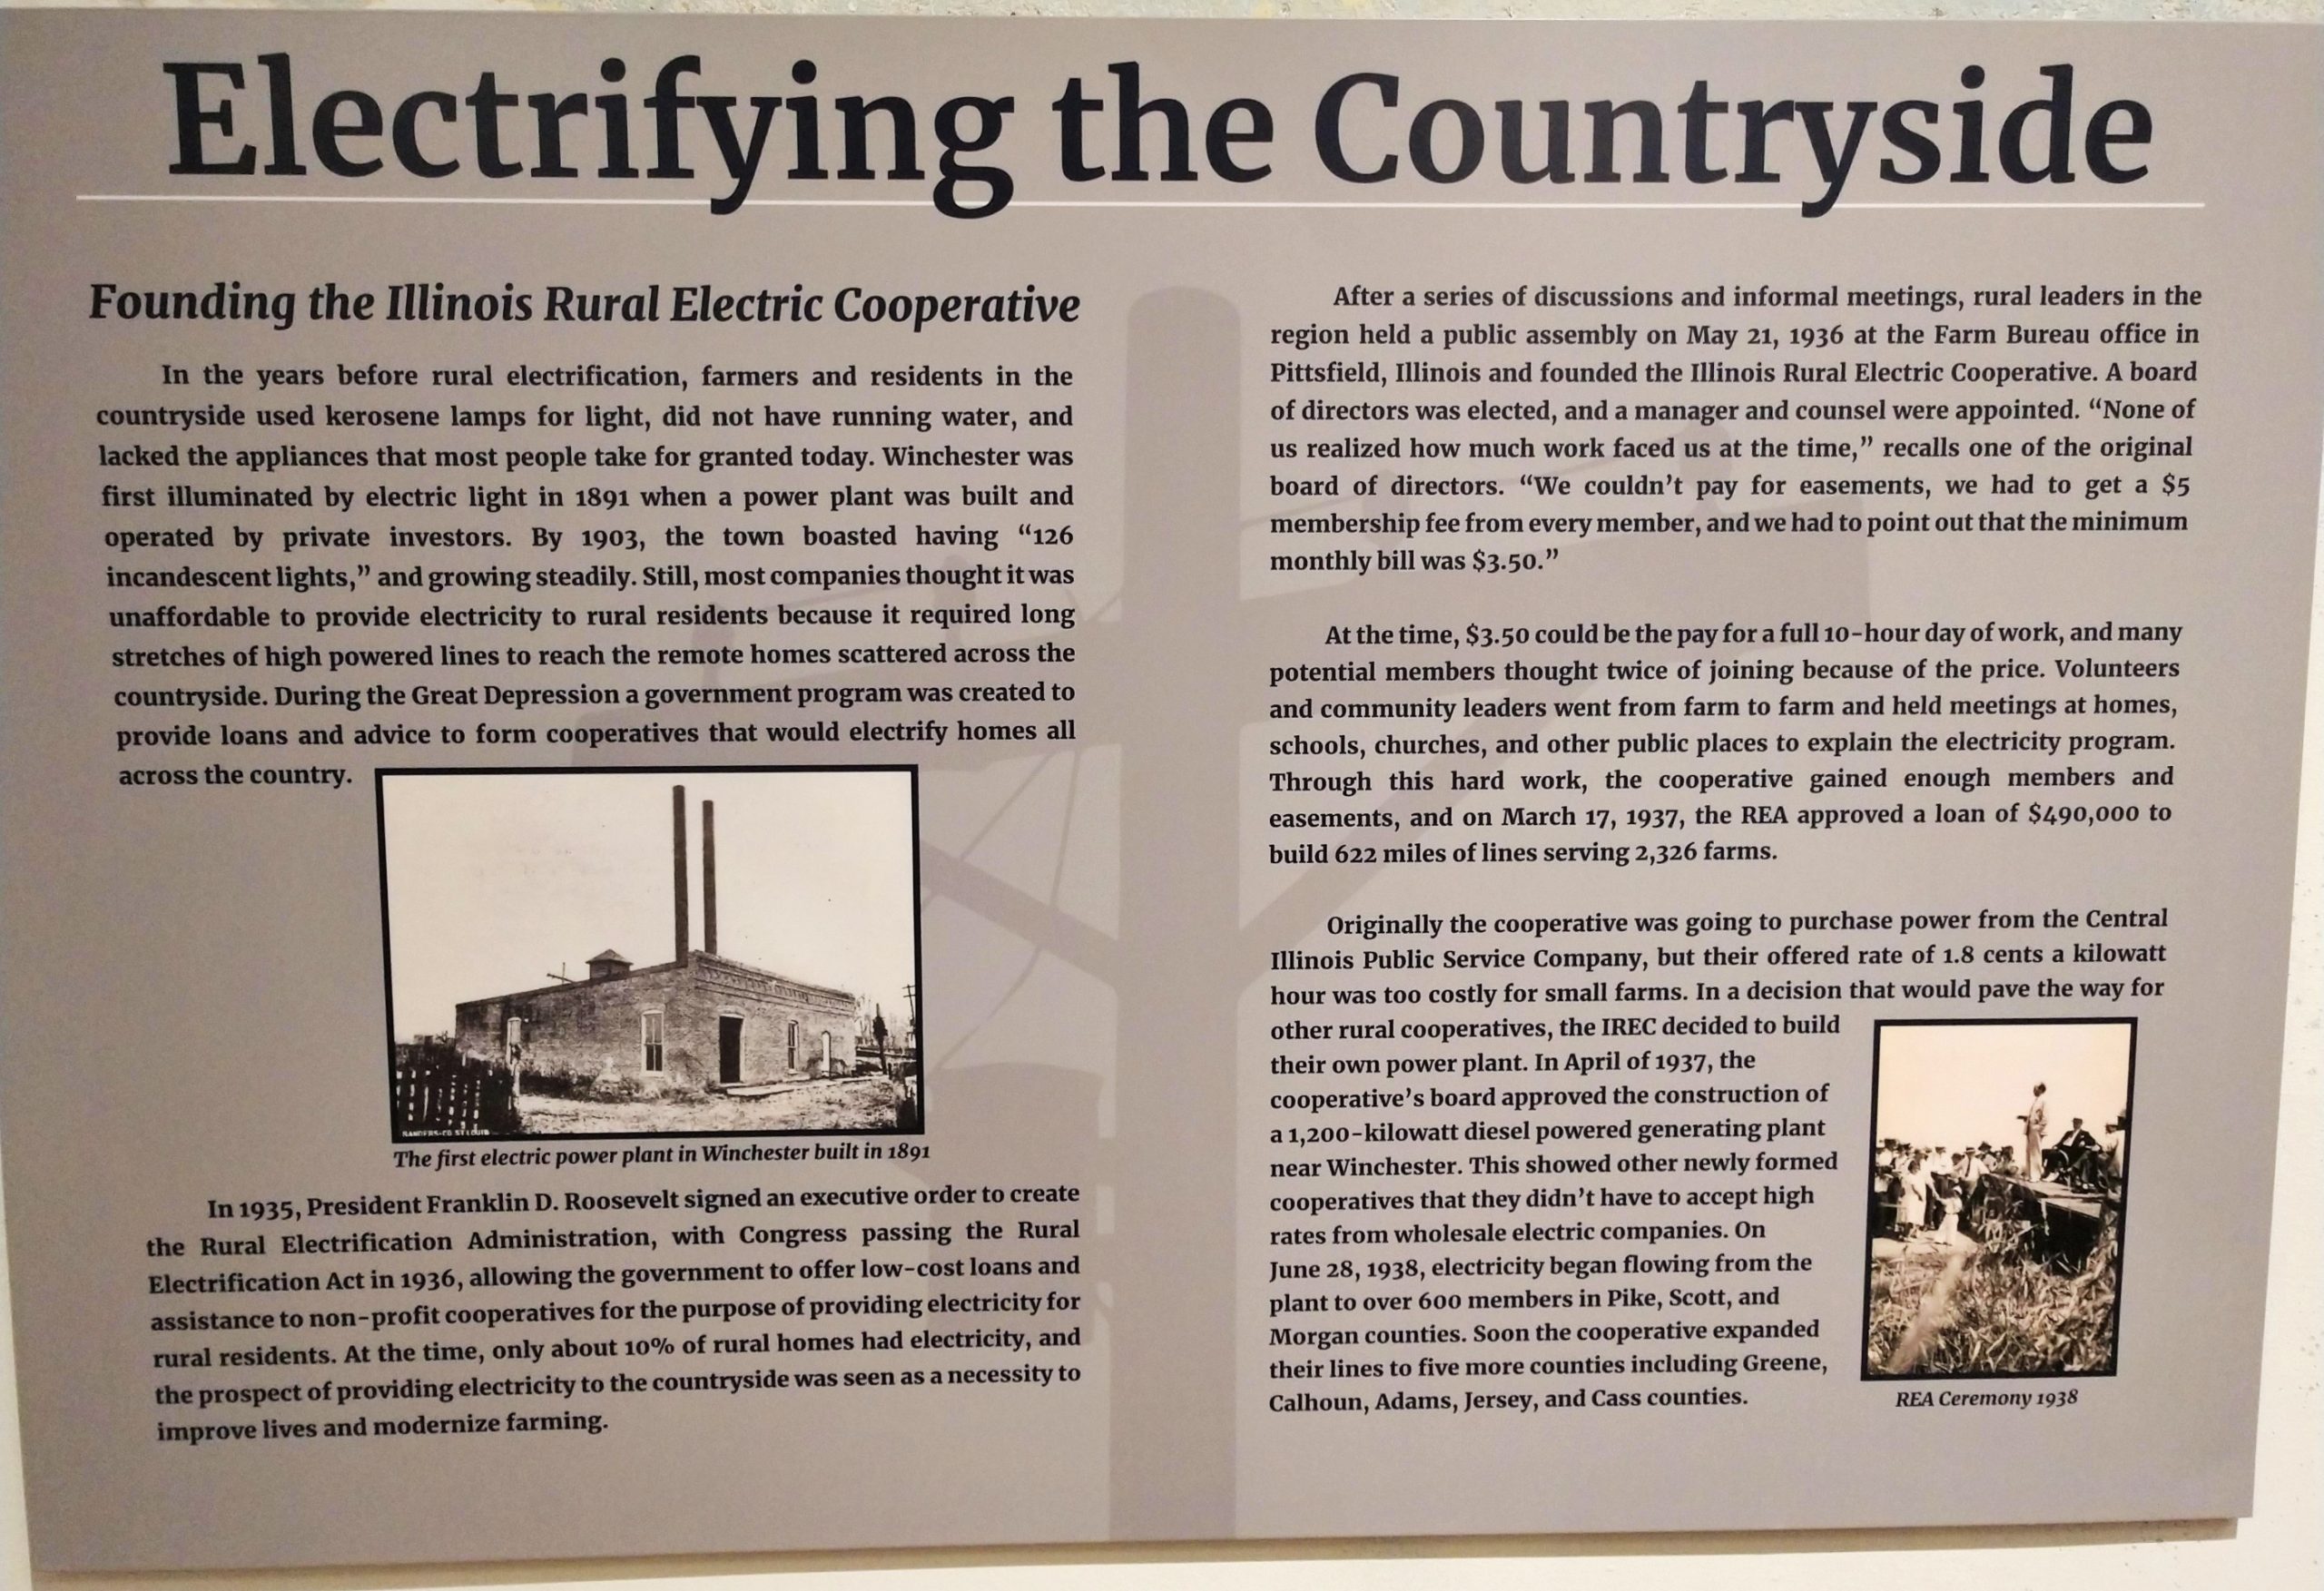 Photograph of a section of Old School Museum's companion exhibition discussing Illinois Rural Electric Cooperative.